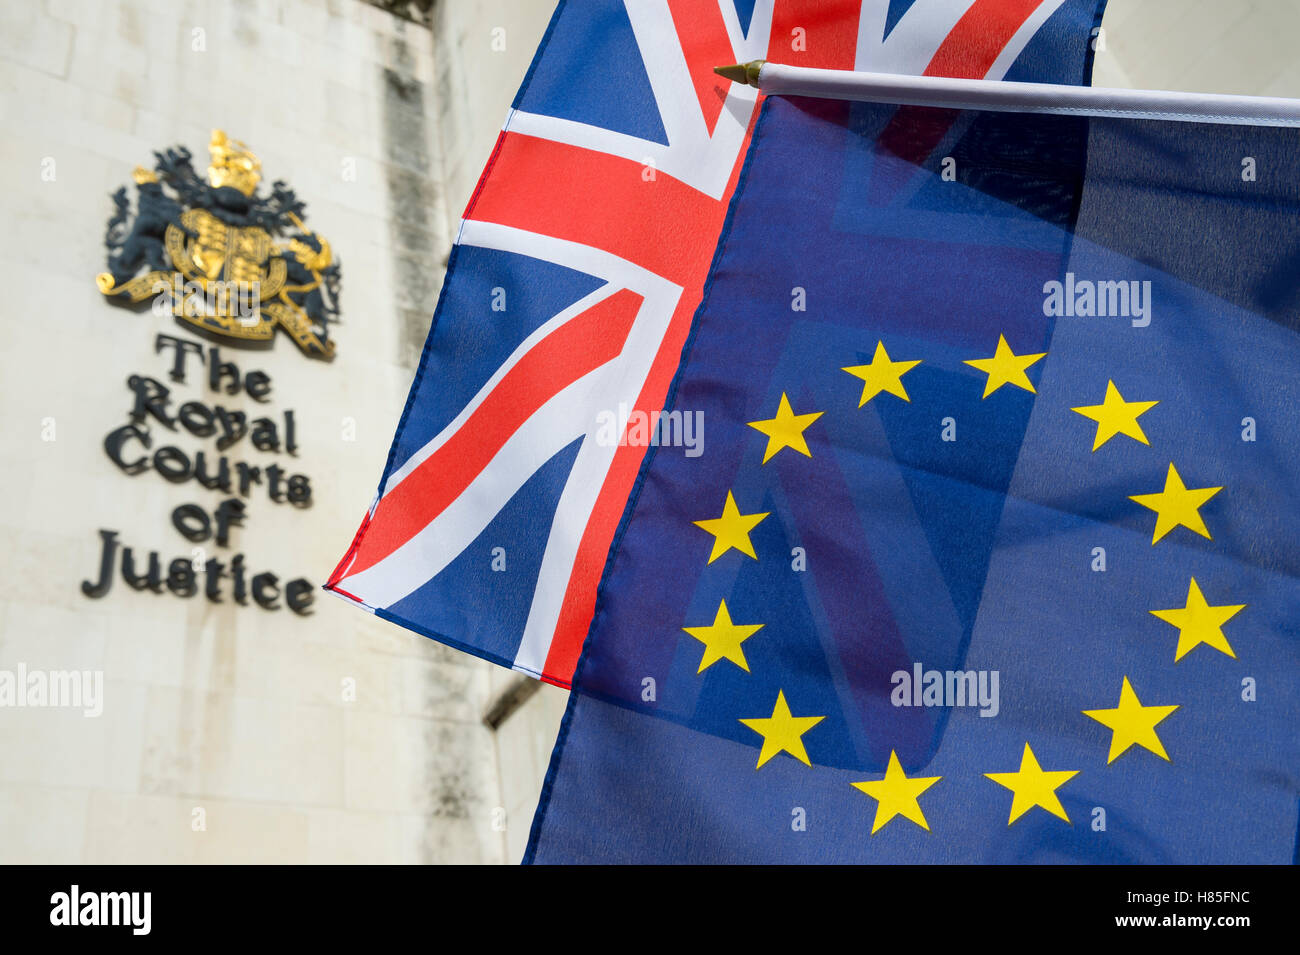 EU and Union Jack flags flying in front of The Royal Courts of Justice public building in London, UK Stock Photo